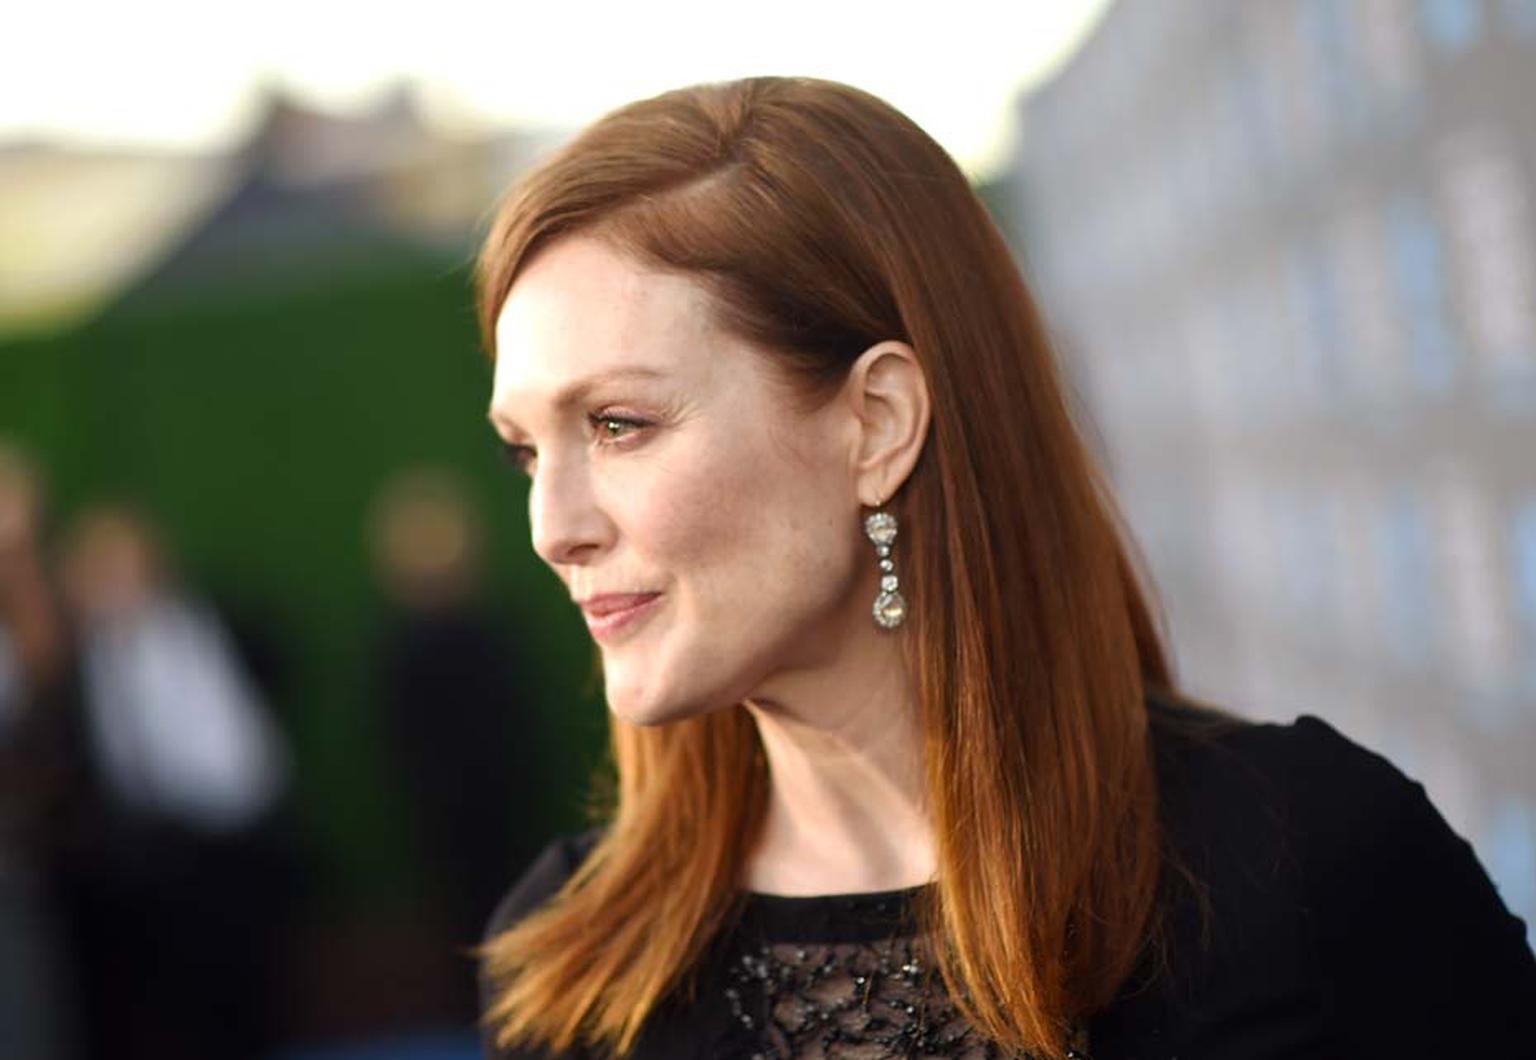 Best Actress Oscars favourite, Julianne Moore, wearing 19th century Fred Leighton earrings on the 2015 Critics' Choice Awards red carpet.